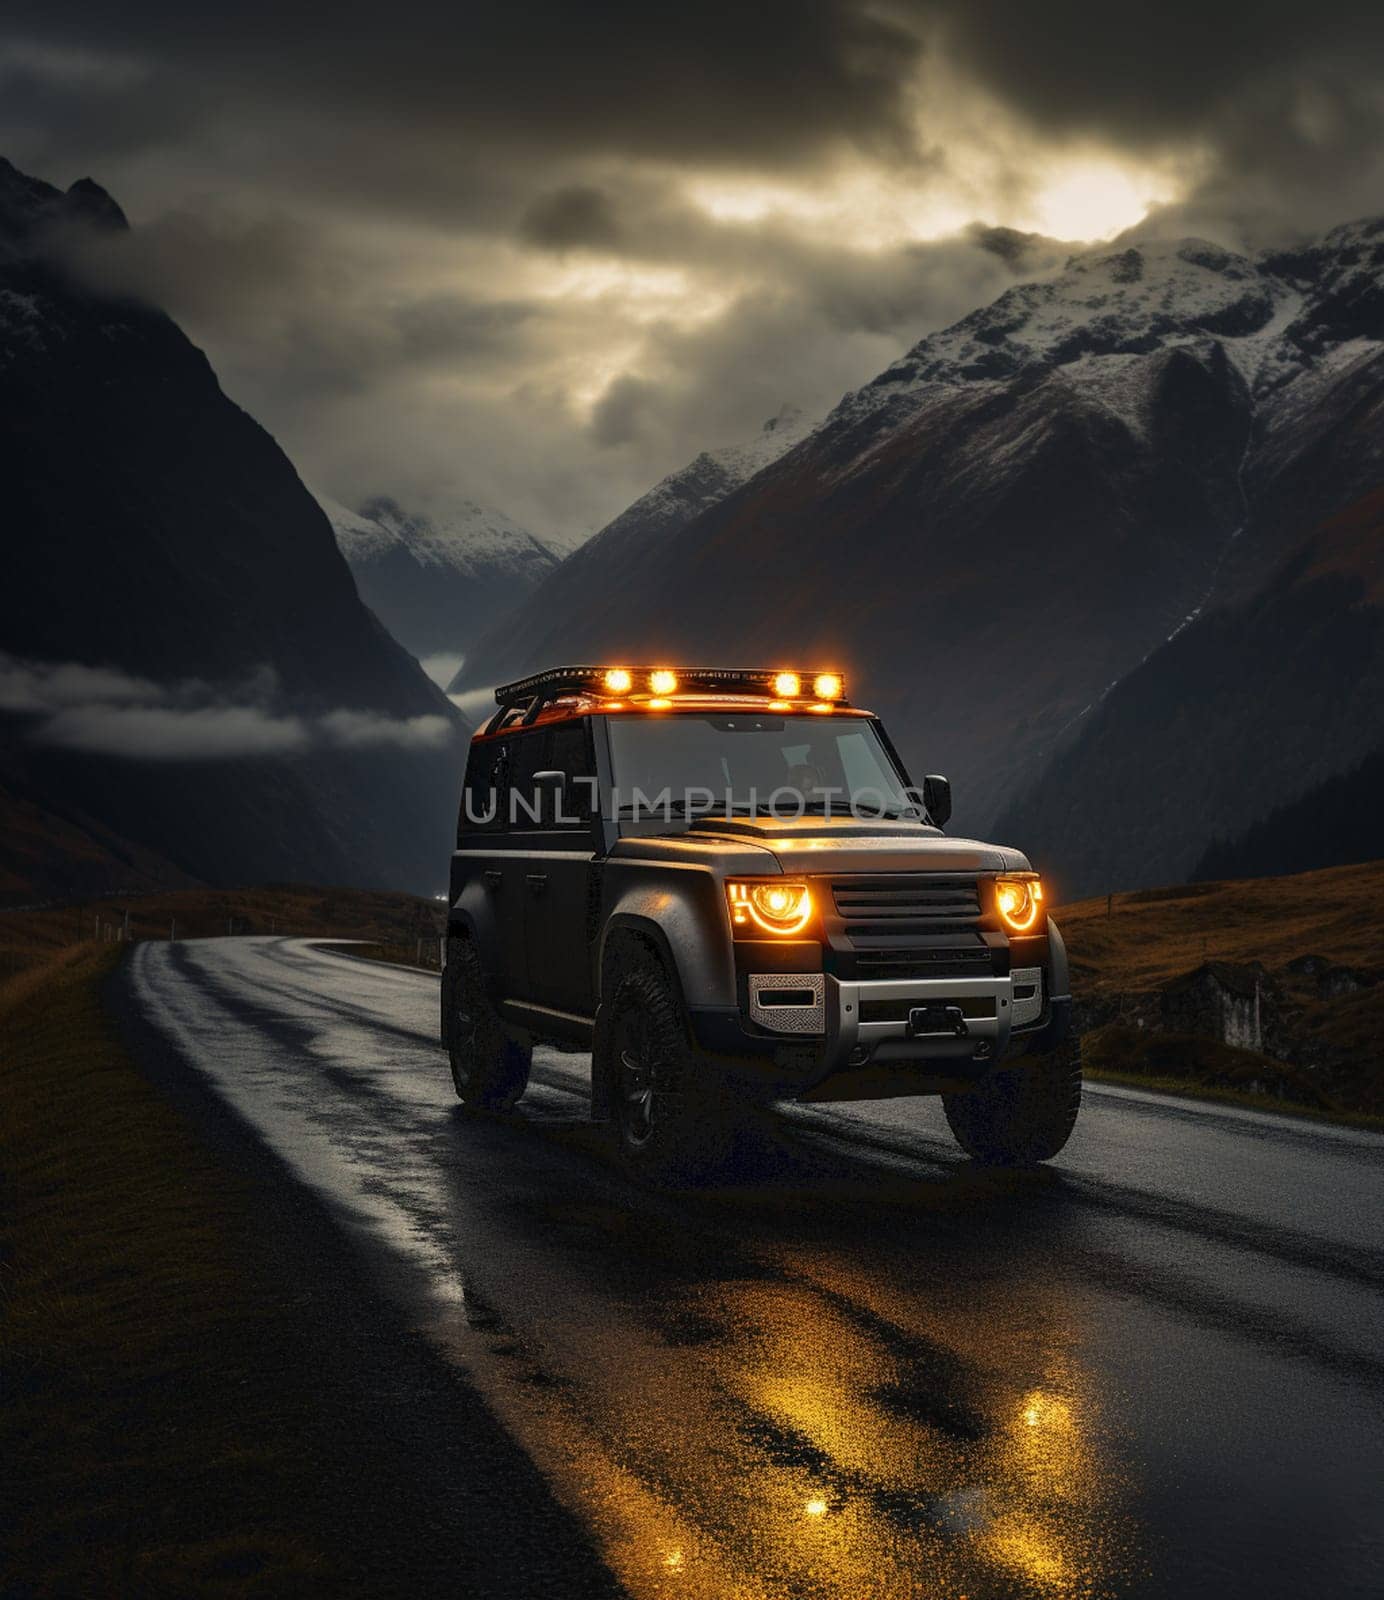 Black off-road truck in the mountains by Andelov13